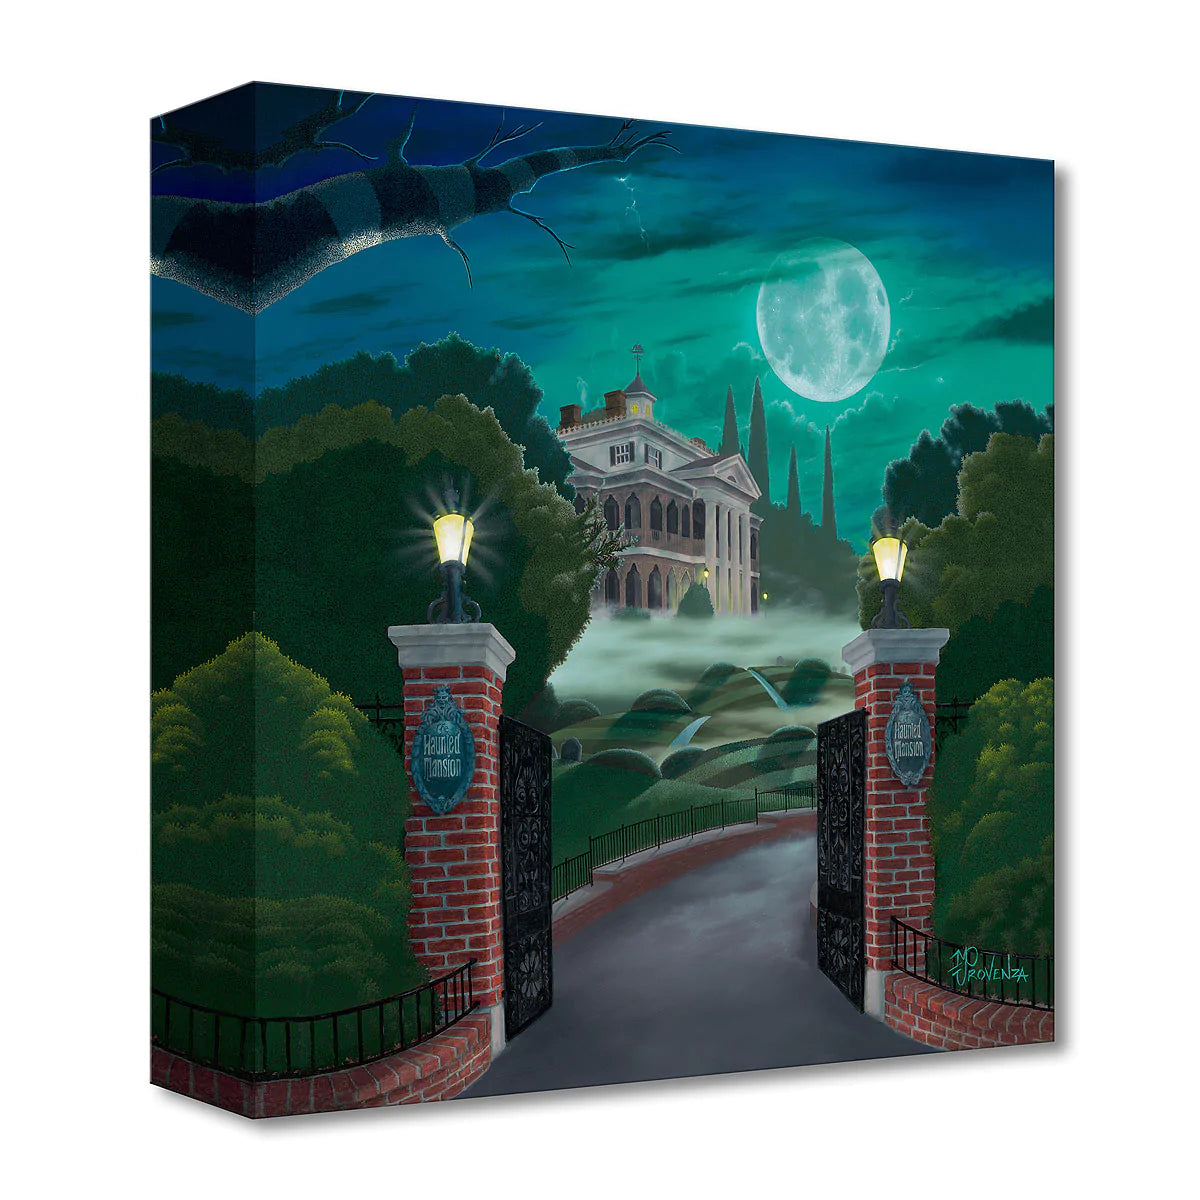 Michael Provenza Disney "Welcome to the Haunted Mansion" Limited Edition Canvas Giclee